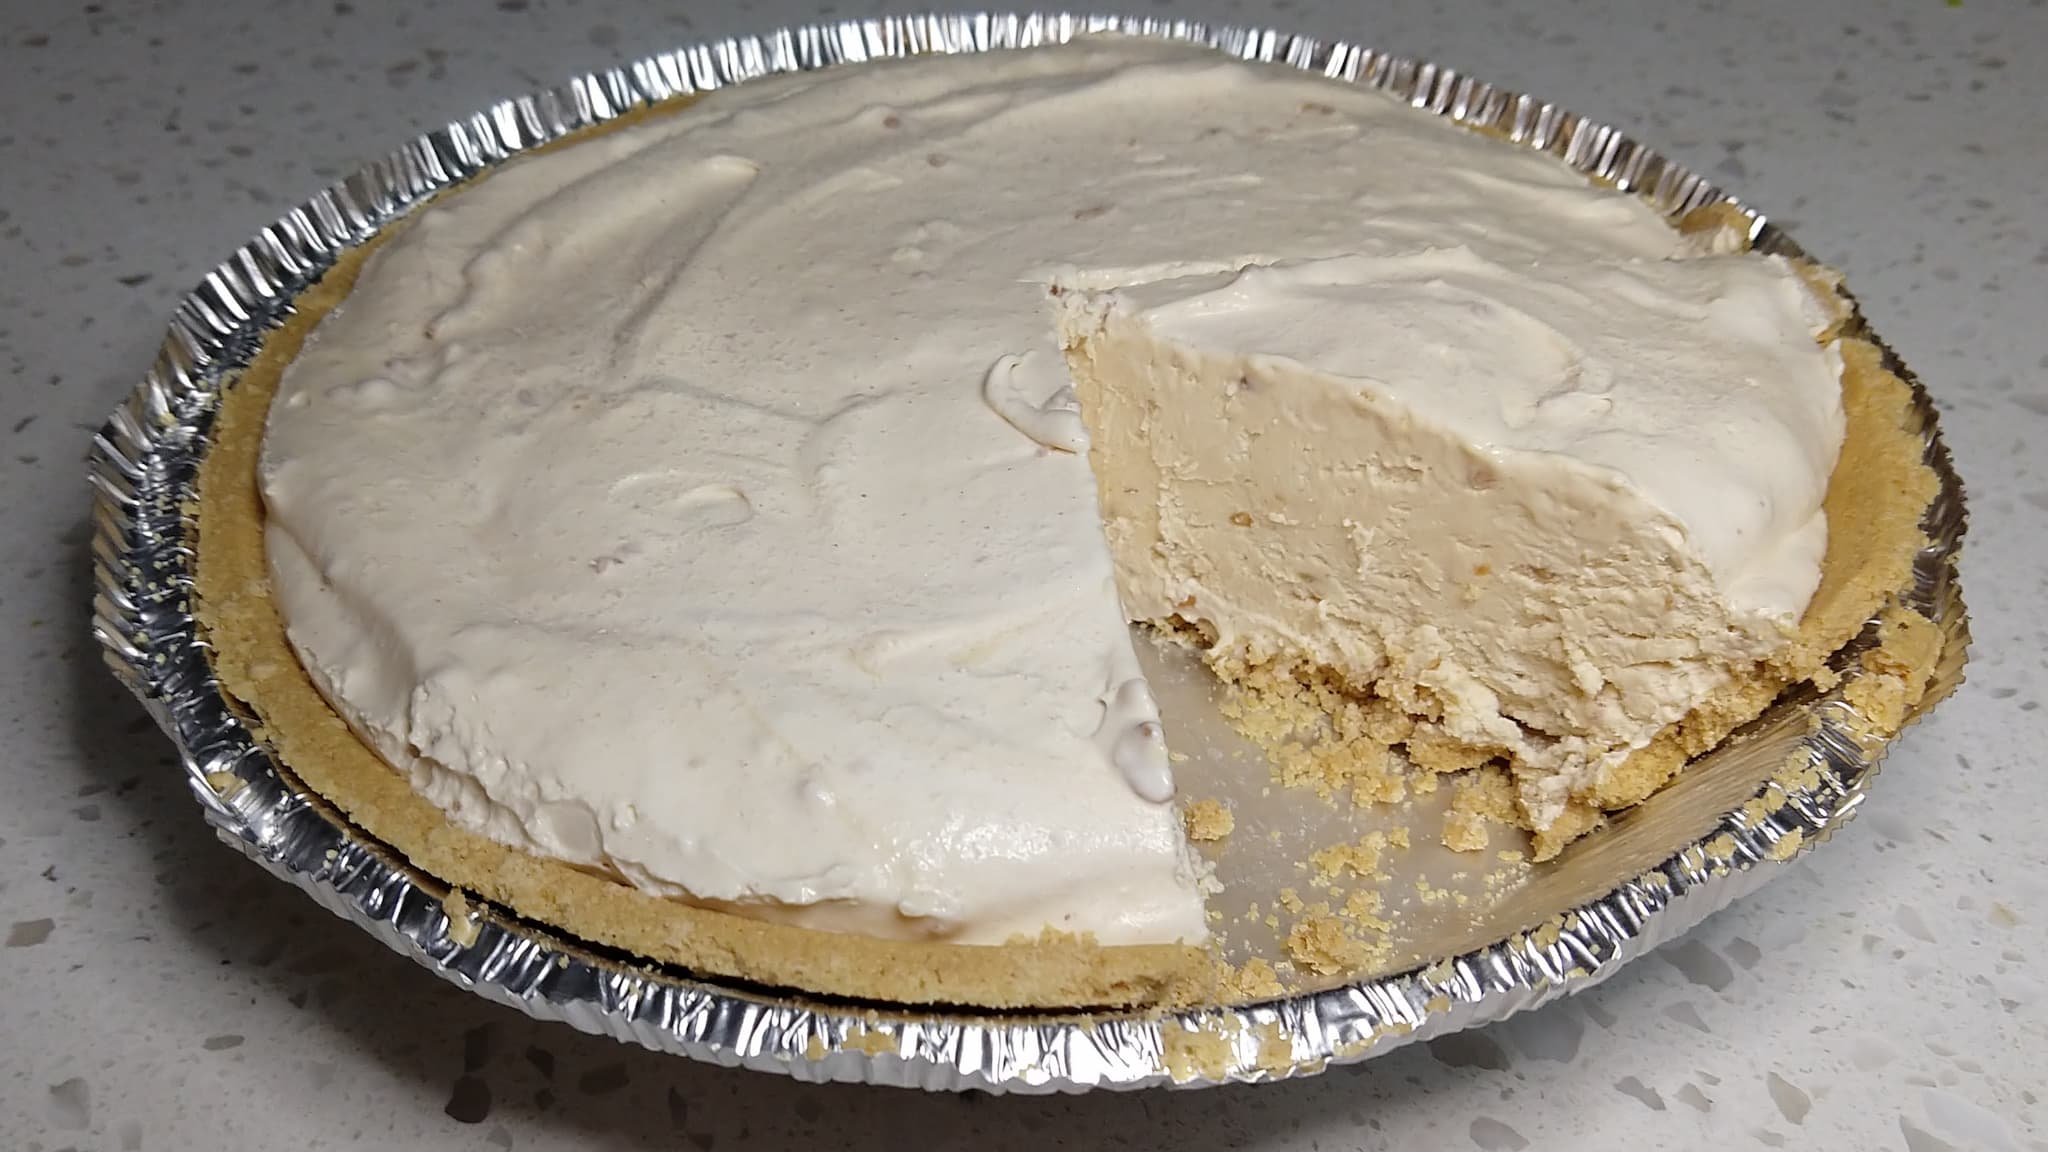 Peanut butter cream pie with slice removed